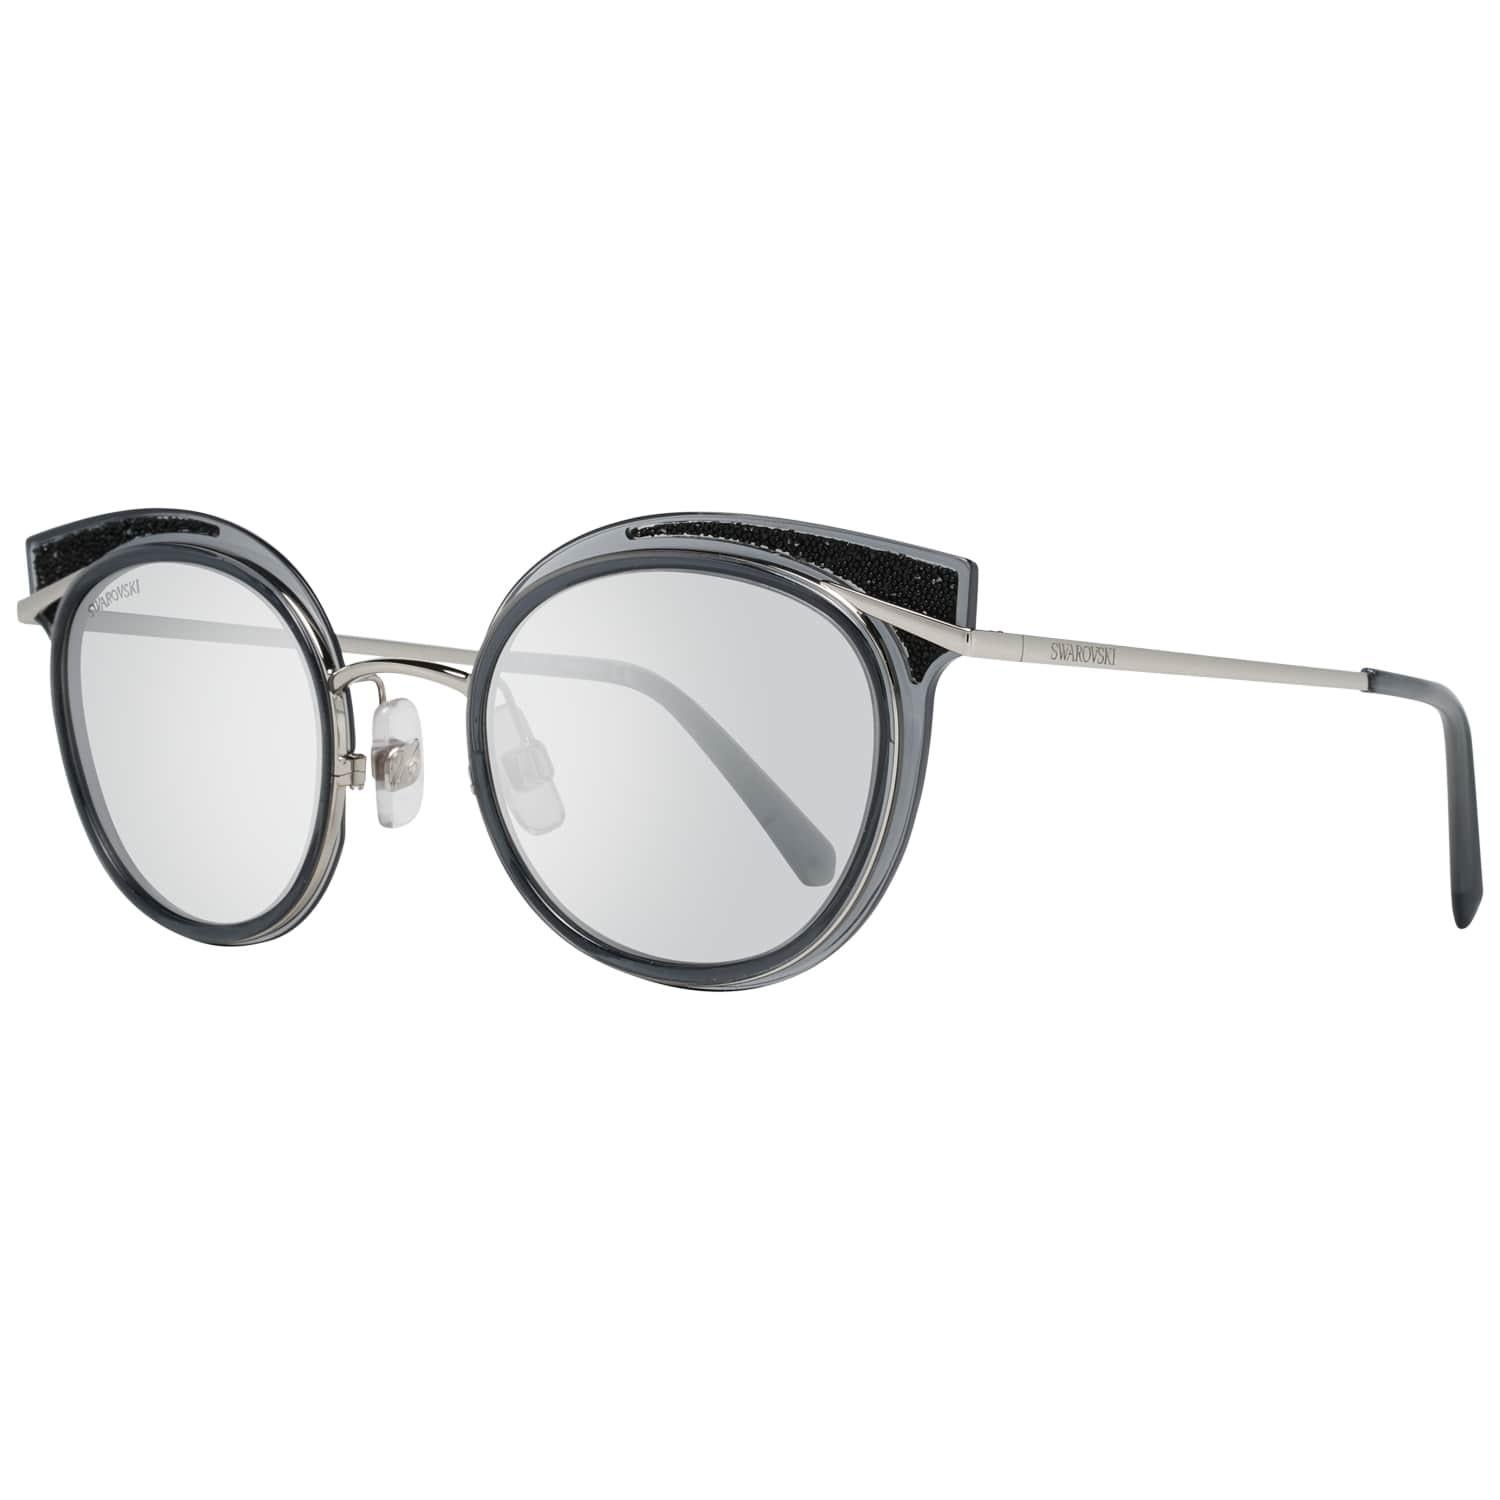 DetailsMATERIAL: MetalCOLOR: GreyMODEL: SK0169 5020CGENDER: WomenCOUNTRY OF MANUFACTURE: ChinaTYPE: SunglassesORIGINAL CASE?: YesSTYLE: OvalOCCASION: CasualFEATURES: LightweightLENS COLOR: SilverLENS TECHNOLOGY: MirroredYEAR MANUFACTURED: